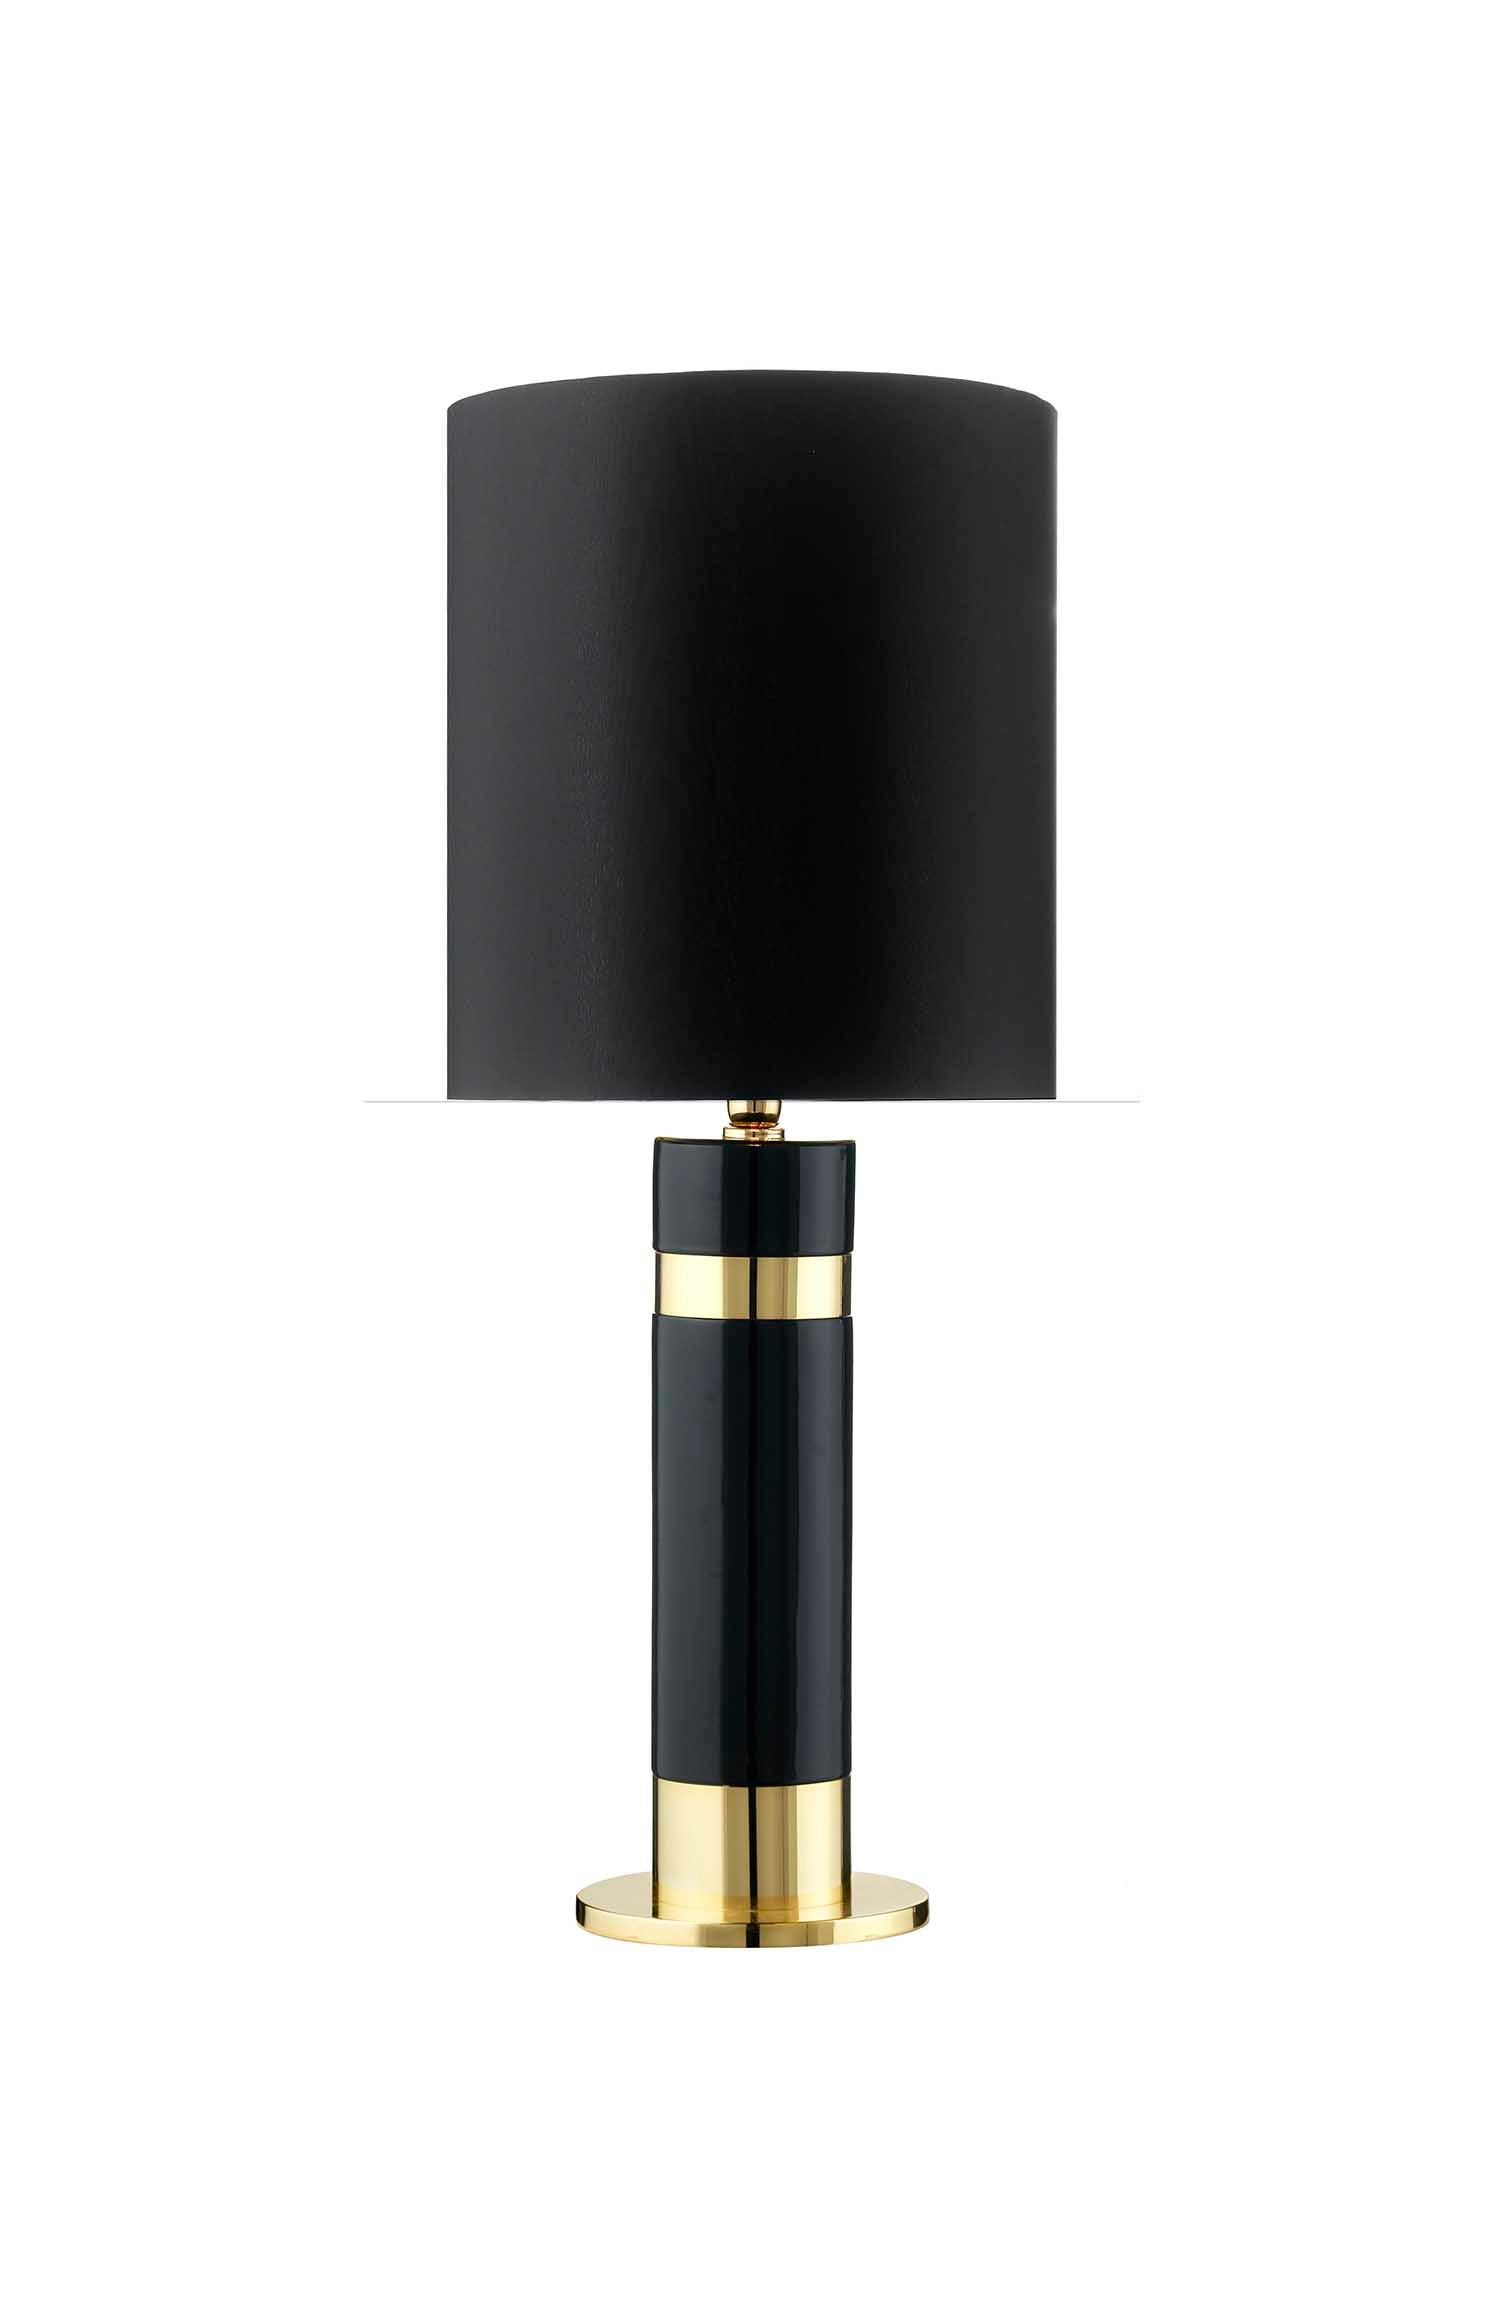 Ceramic table lamp HERMES 1
cod. LHE001
Finished in black enamel and 
24-Karat gold.
With cotton lampshade.

Measures: 
Height 98.0 cm
Diameter 40.0 cm.
 